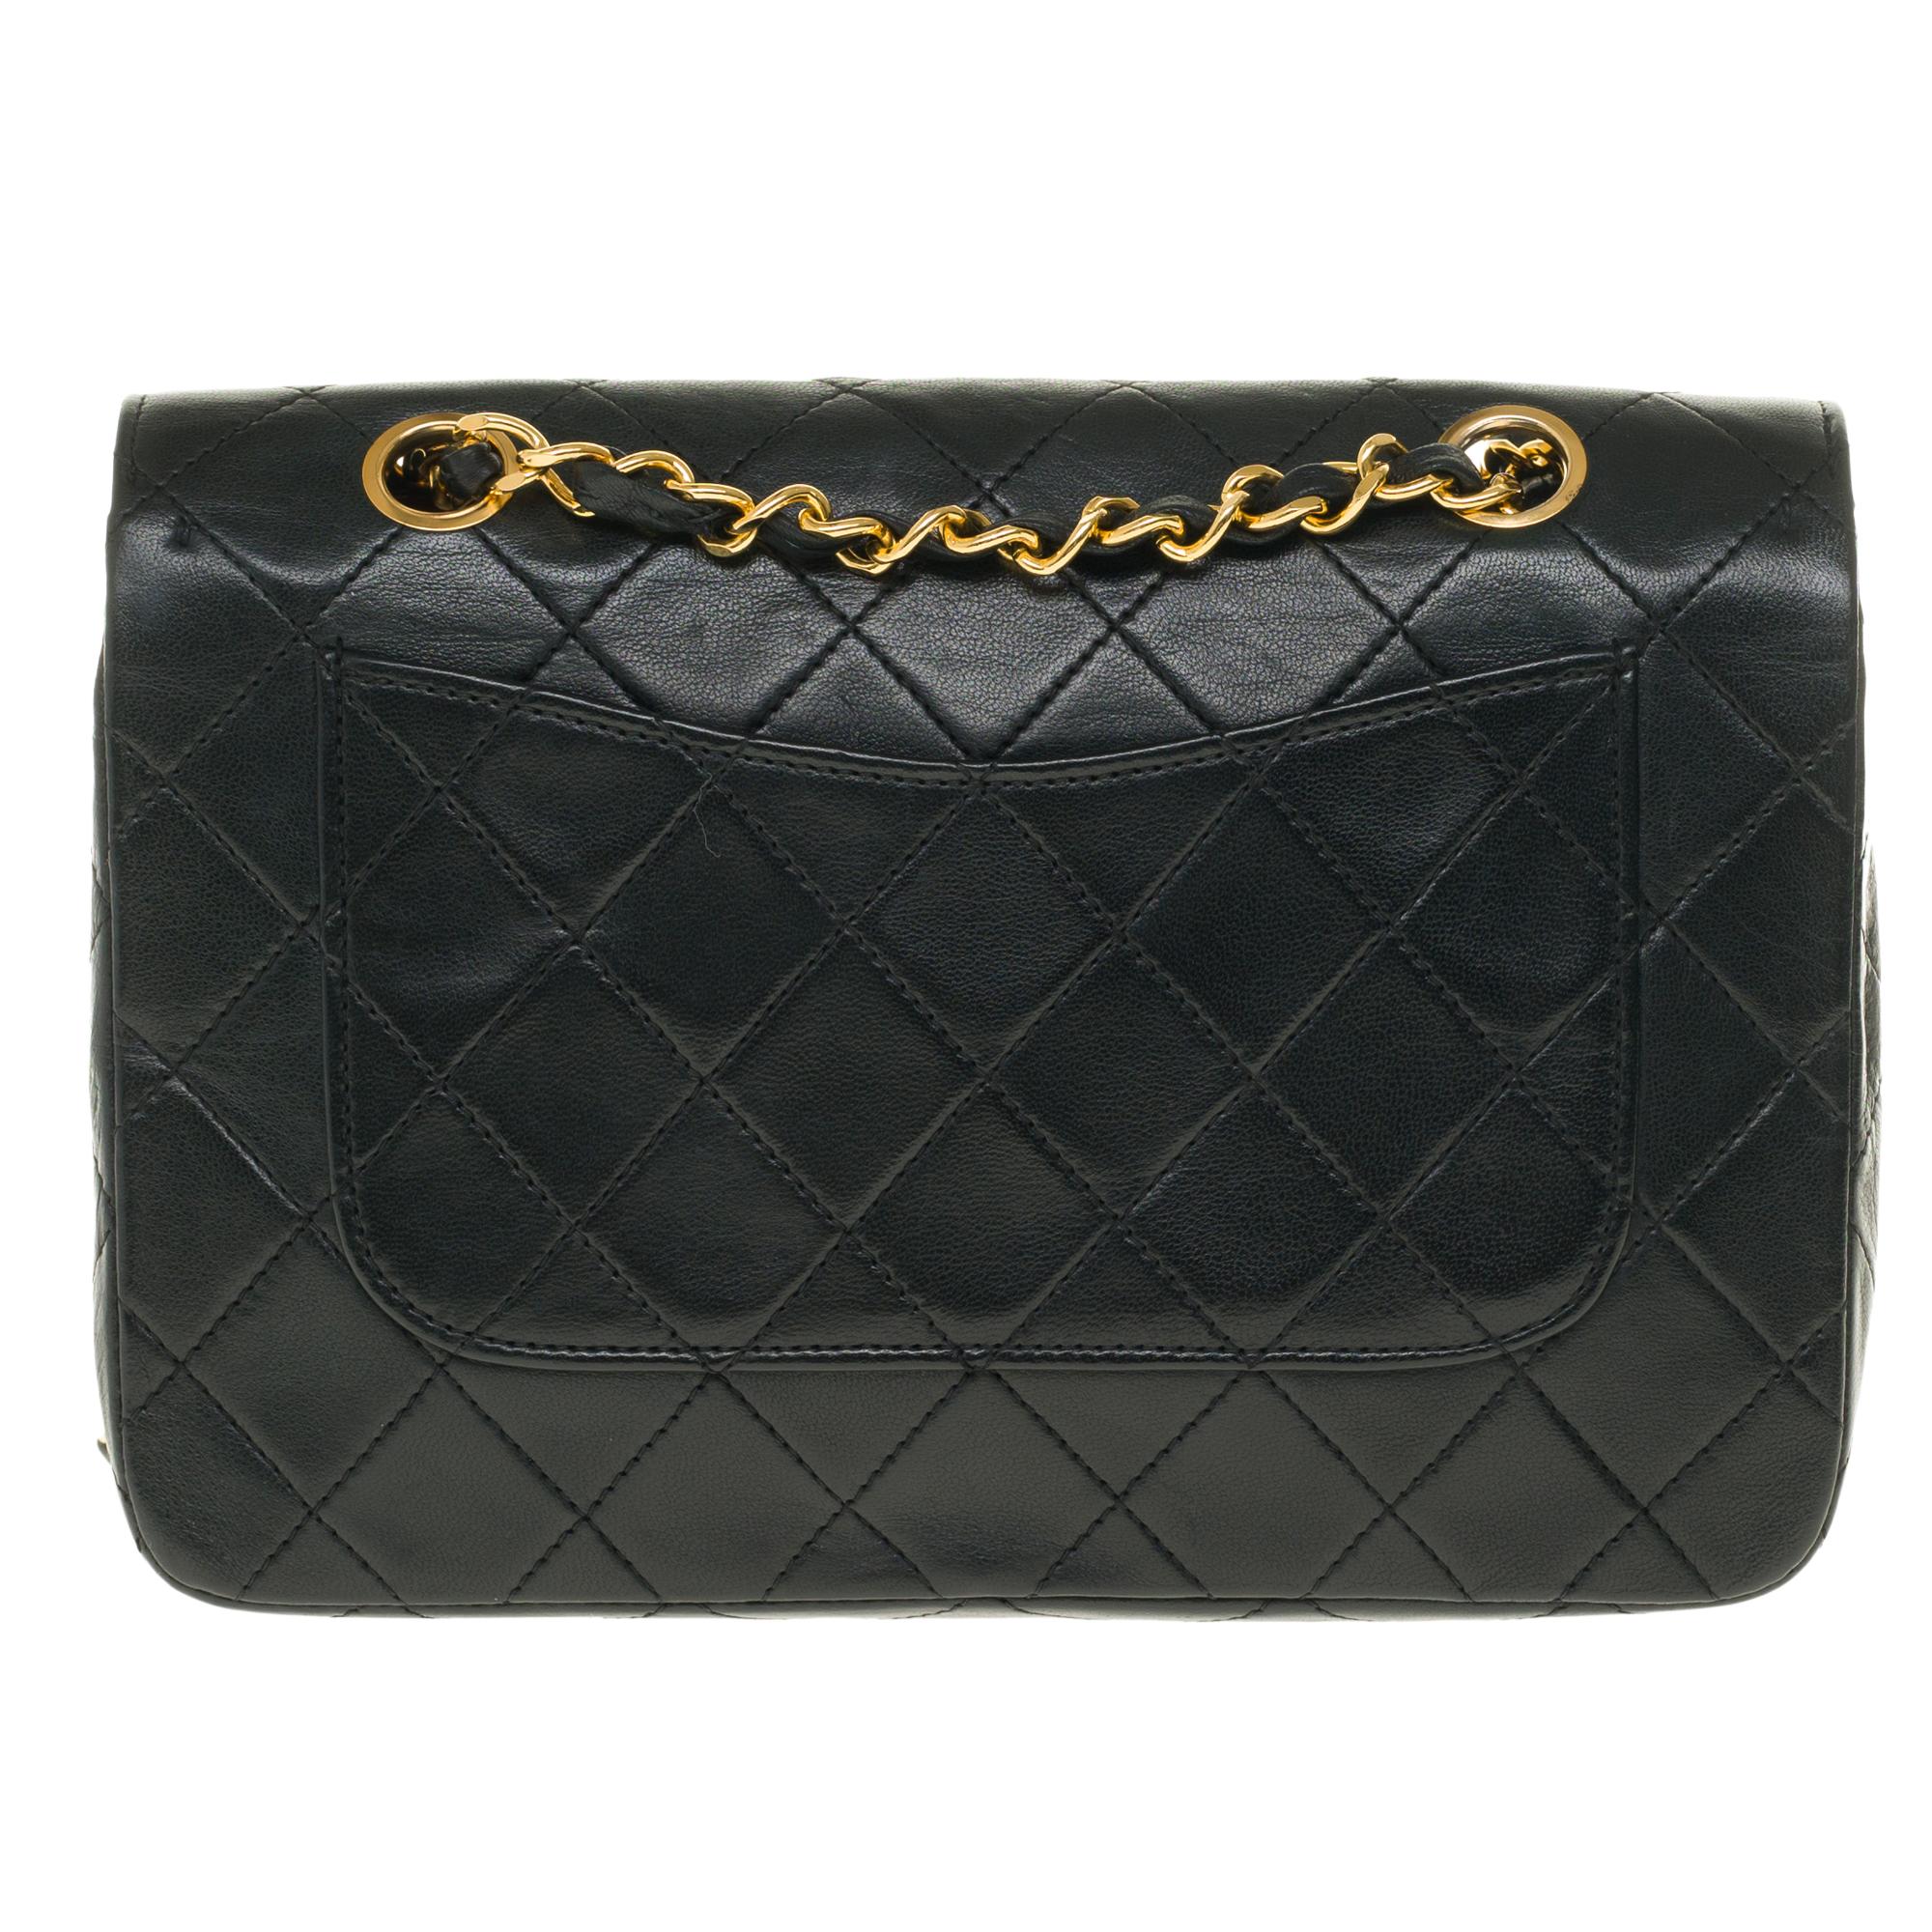 Chic Chanel Classique shoulder bag in black quilted leather, gold plated metal trim (24k plated), a gold plated metal chain handle intertwined with black leather allowing a shoulder or shoulder strap.

Gilded metal logo closure on flap.
A patch